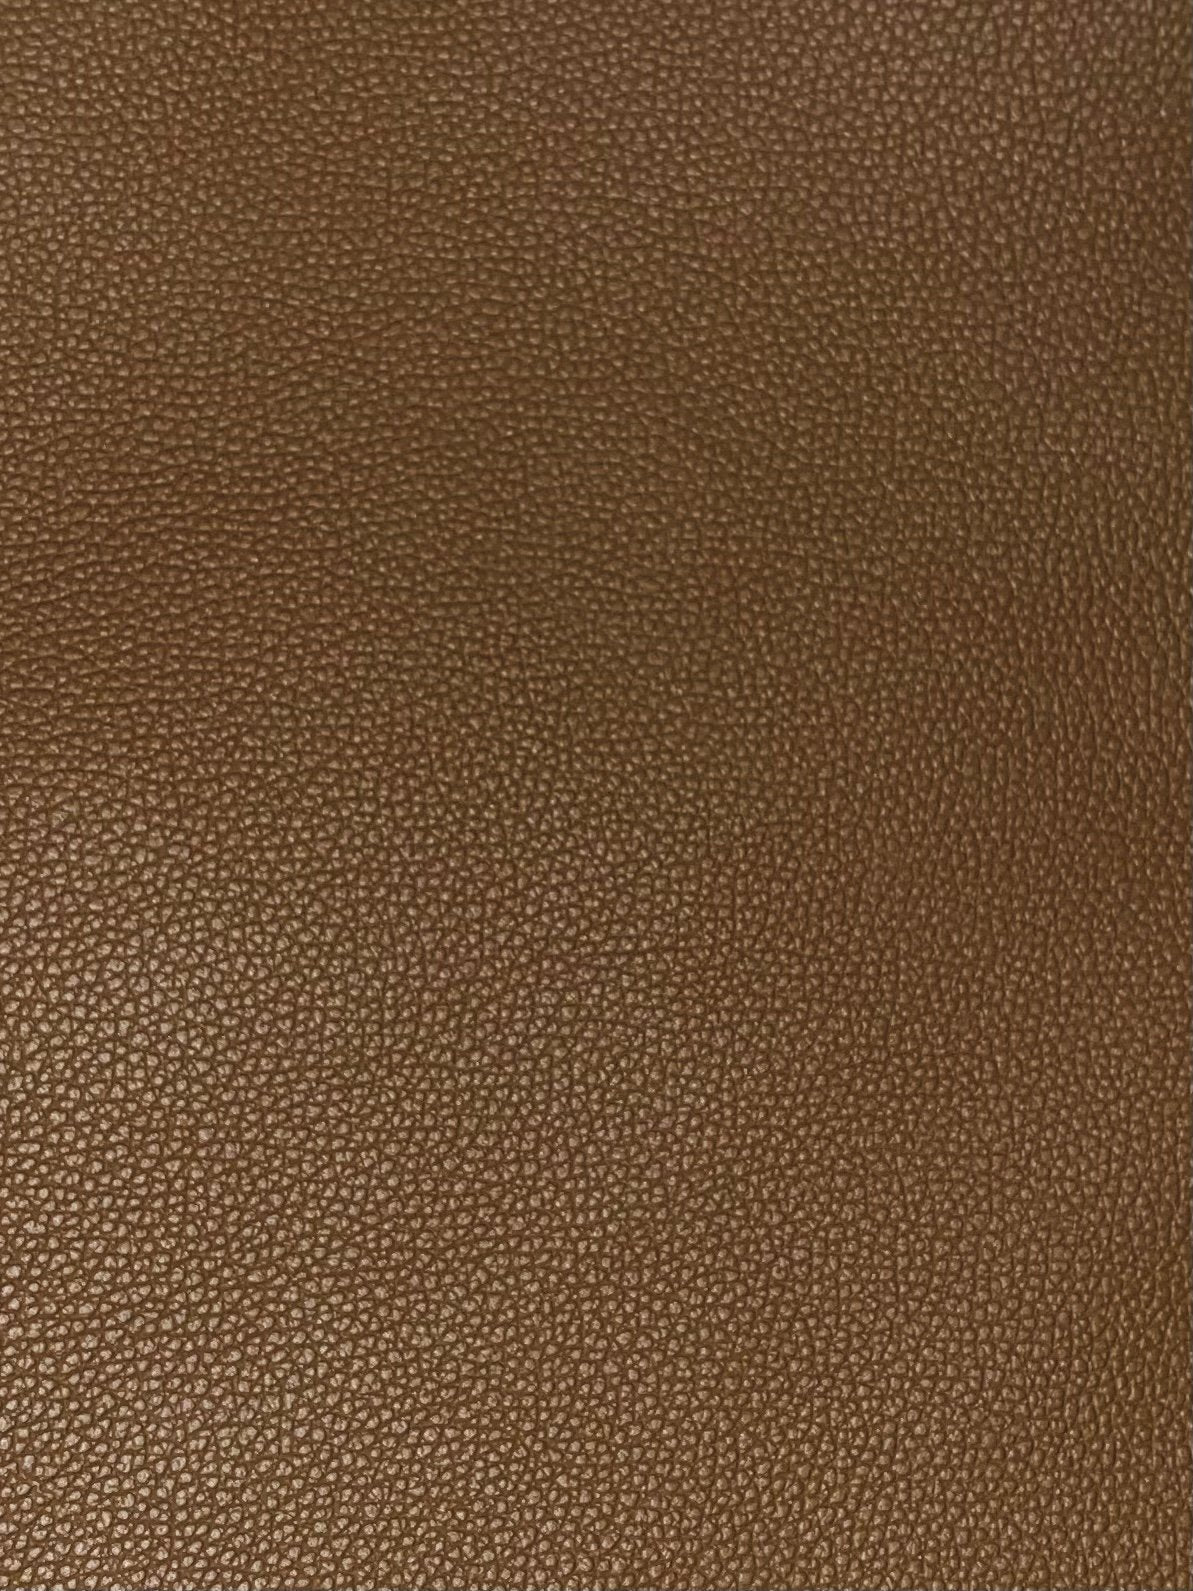 Solid Faux Leather .9mm Soft Back RETAIL